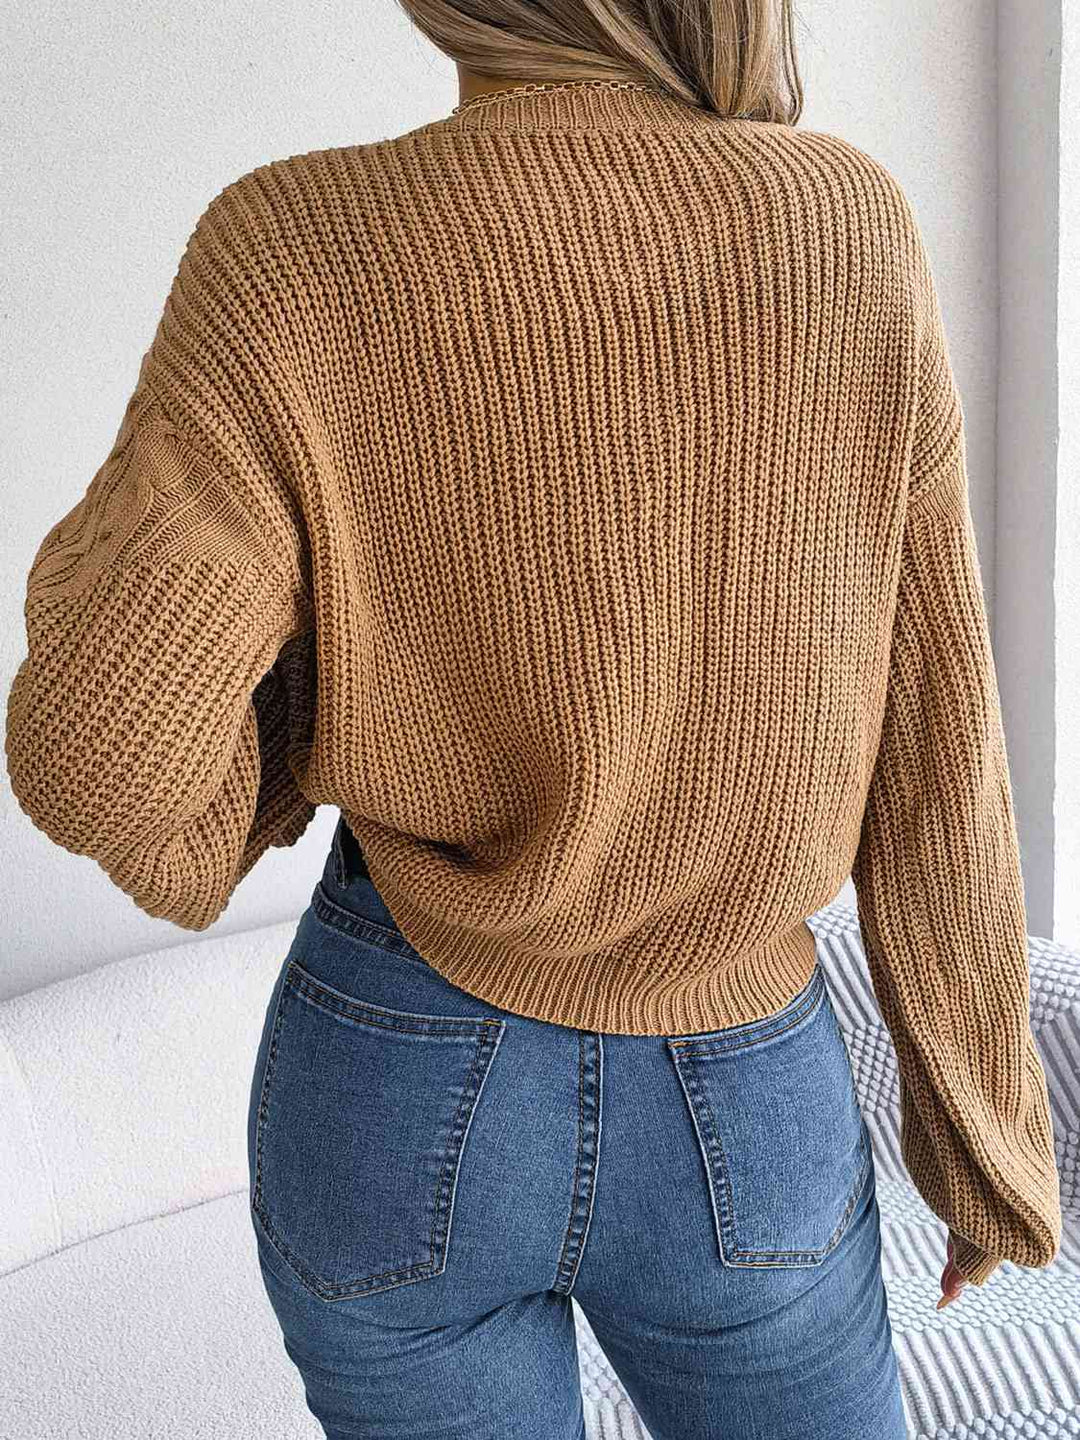 Trendsi sweater Gypsy Riley Cable-Knit Drop Shoulder Sweater